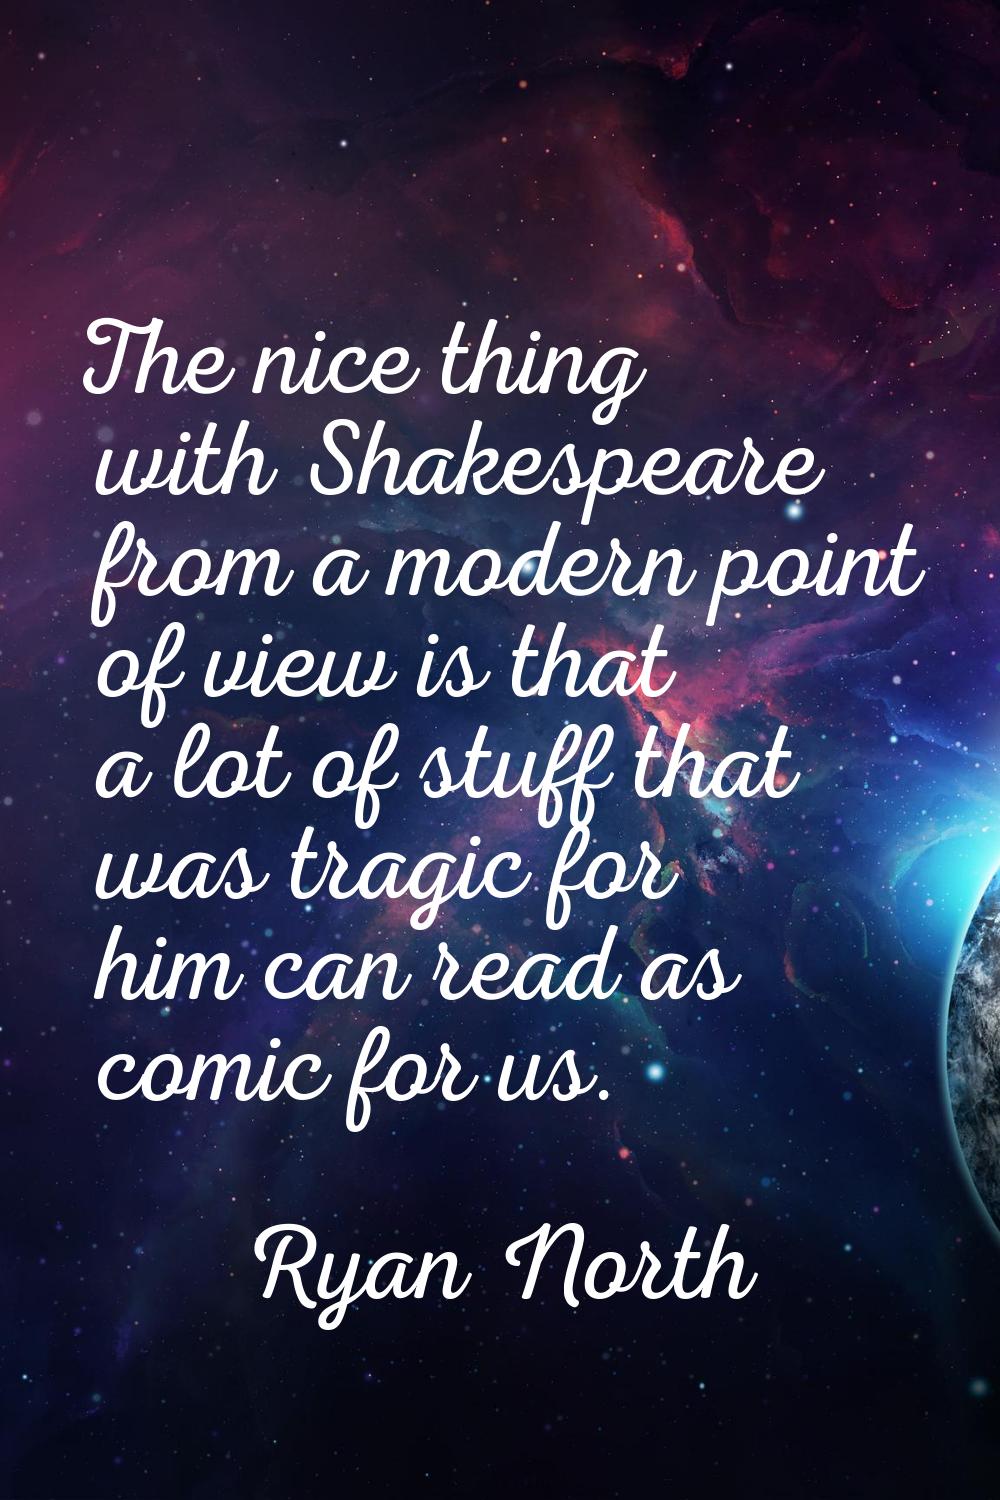 The nice thing with Shakespeare from a modern point of view is that a lot of stuff that was tragic 